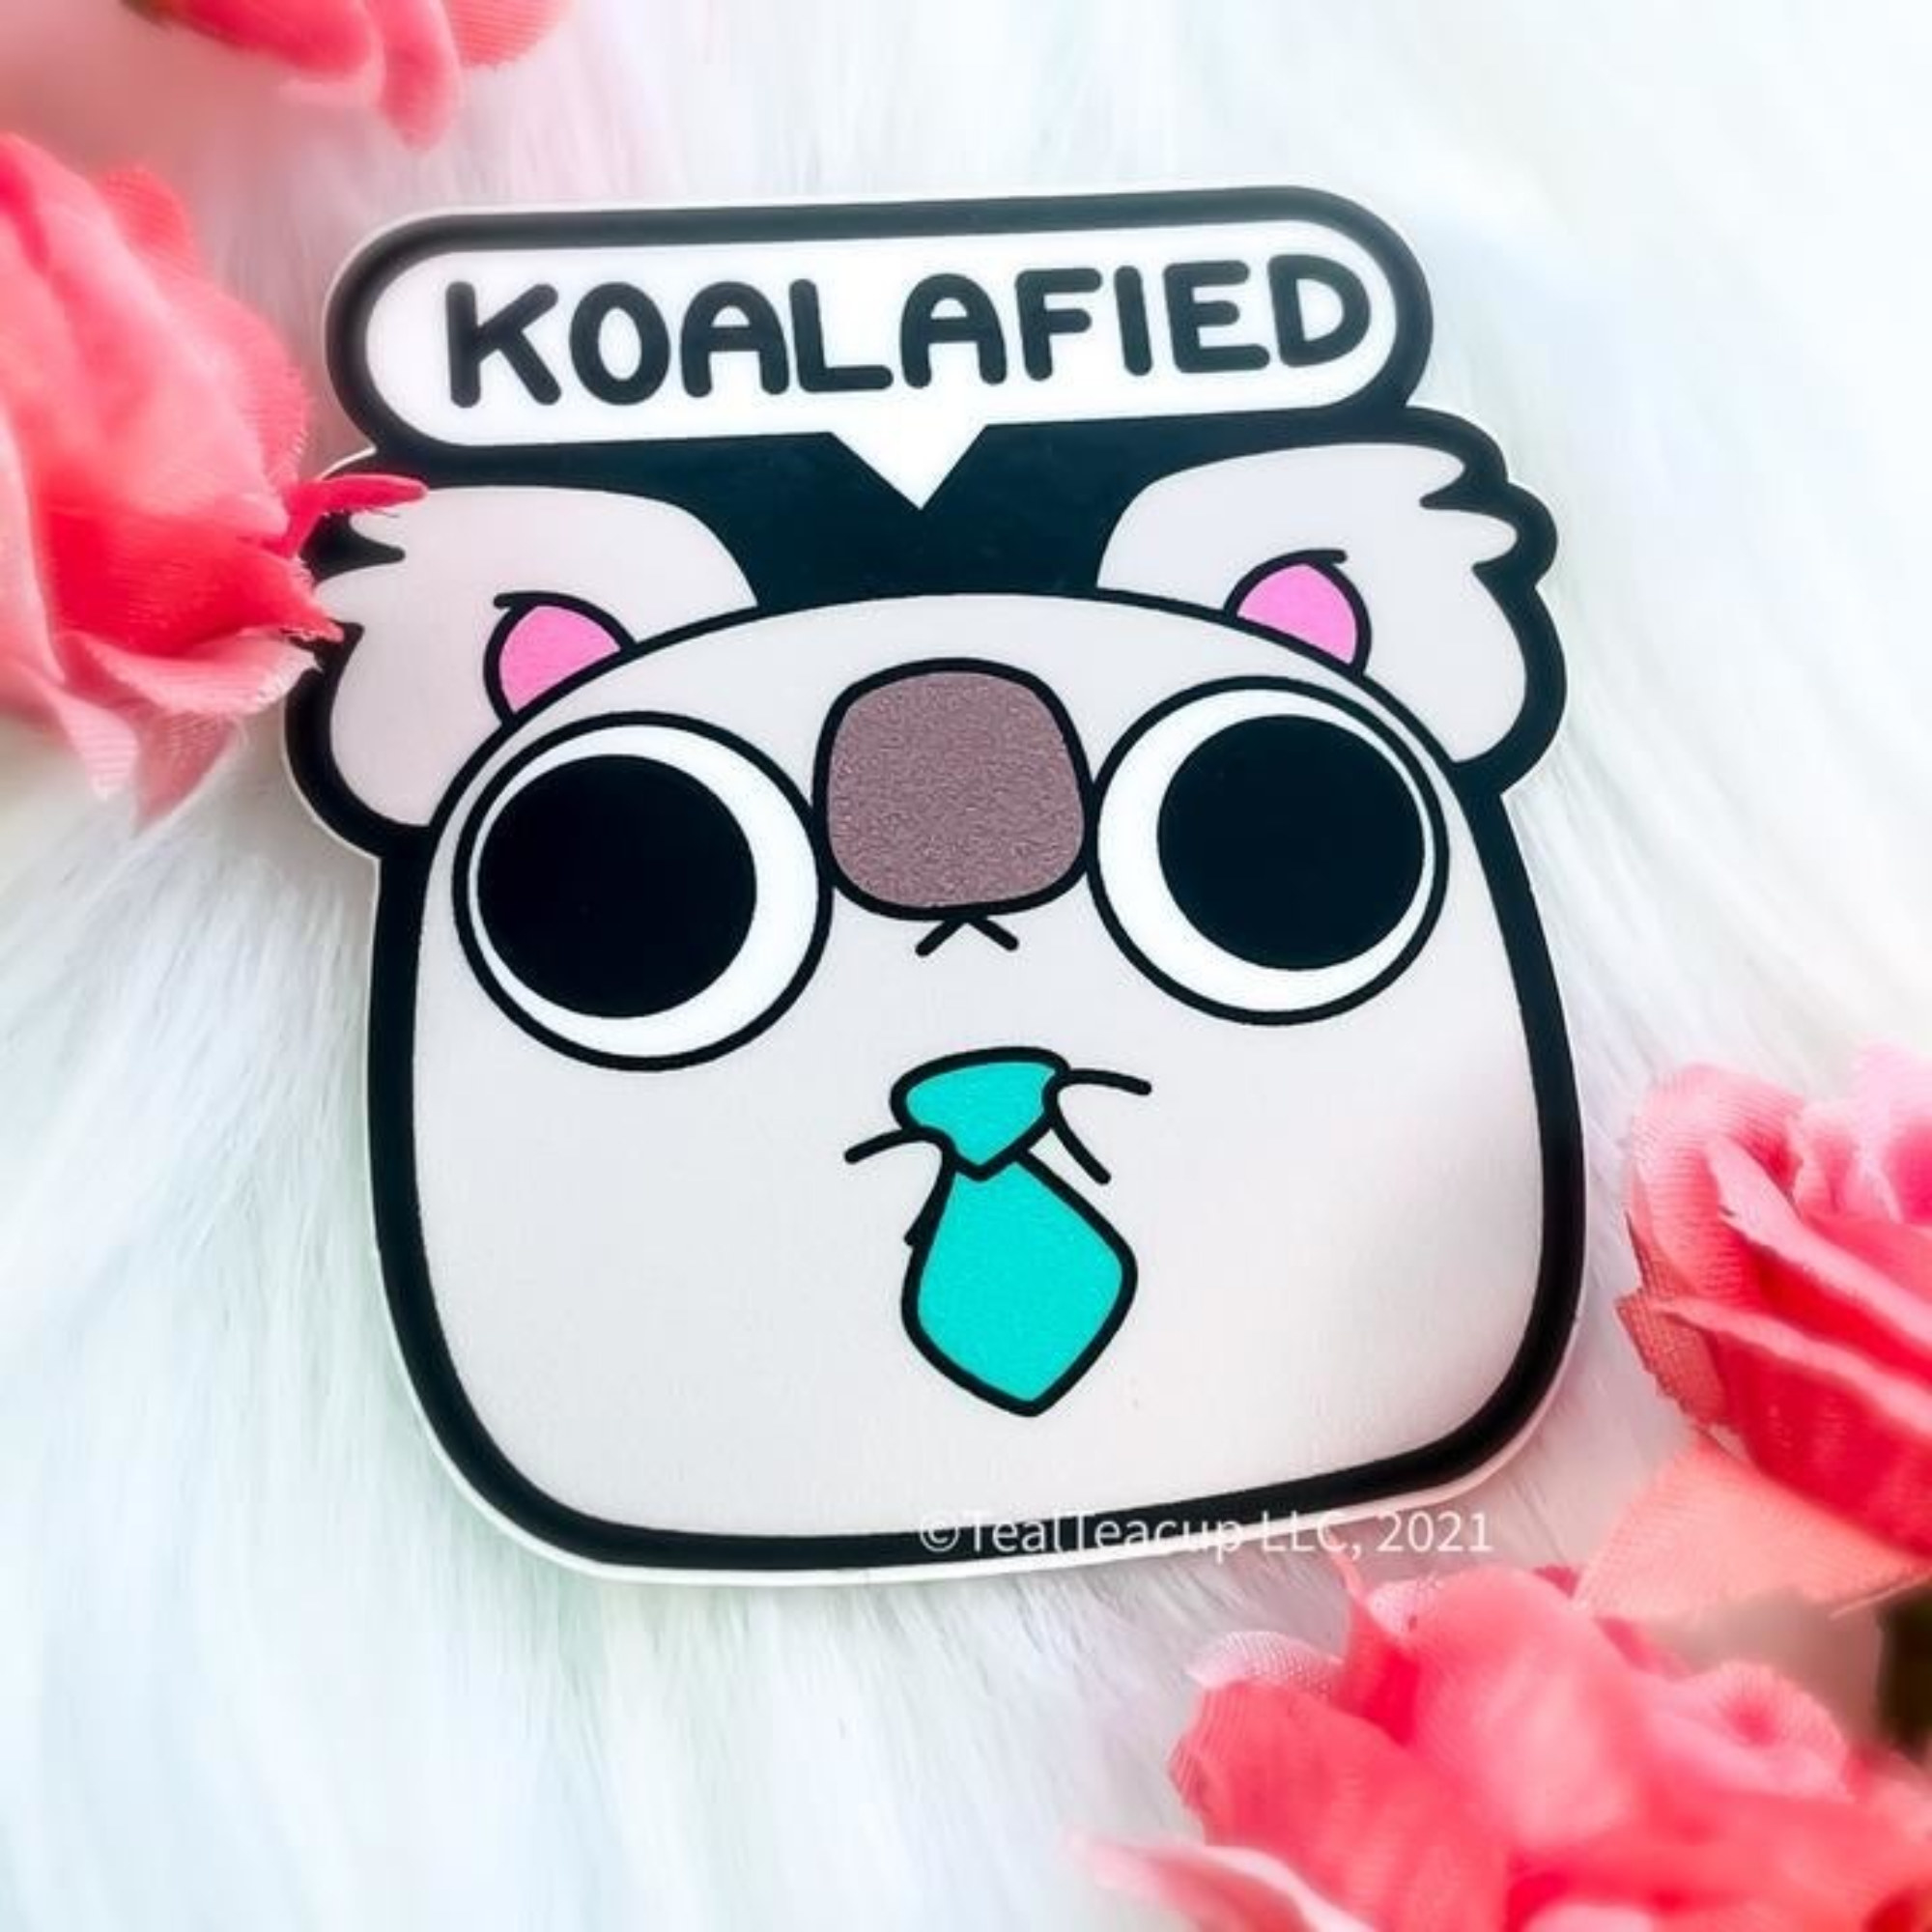 chonky koala wearing a tie with the text &quot;koalaified&quot;